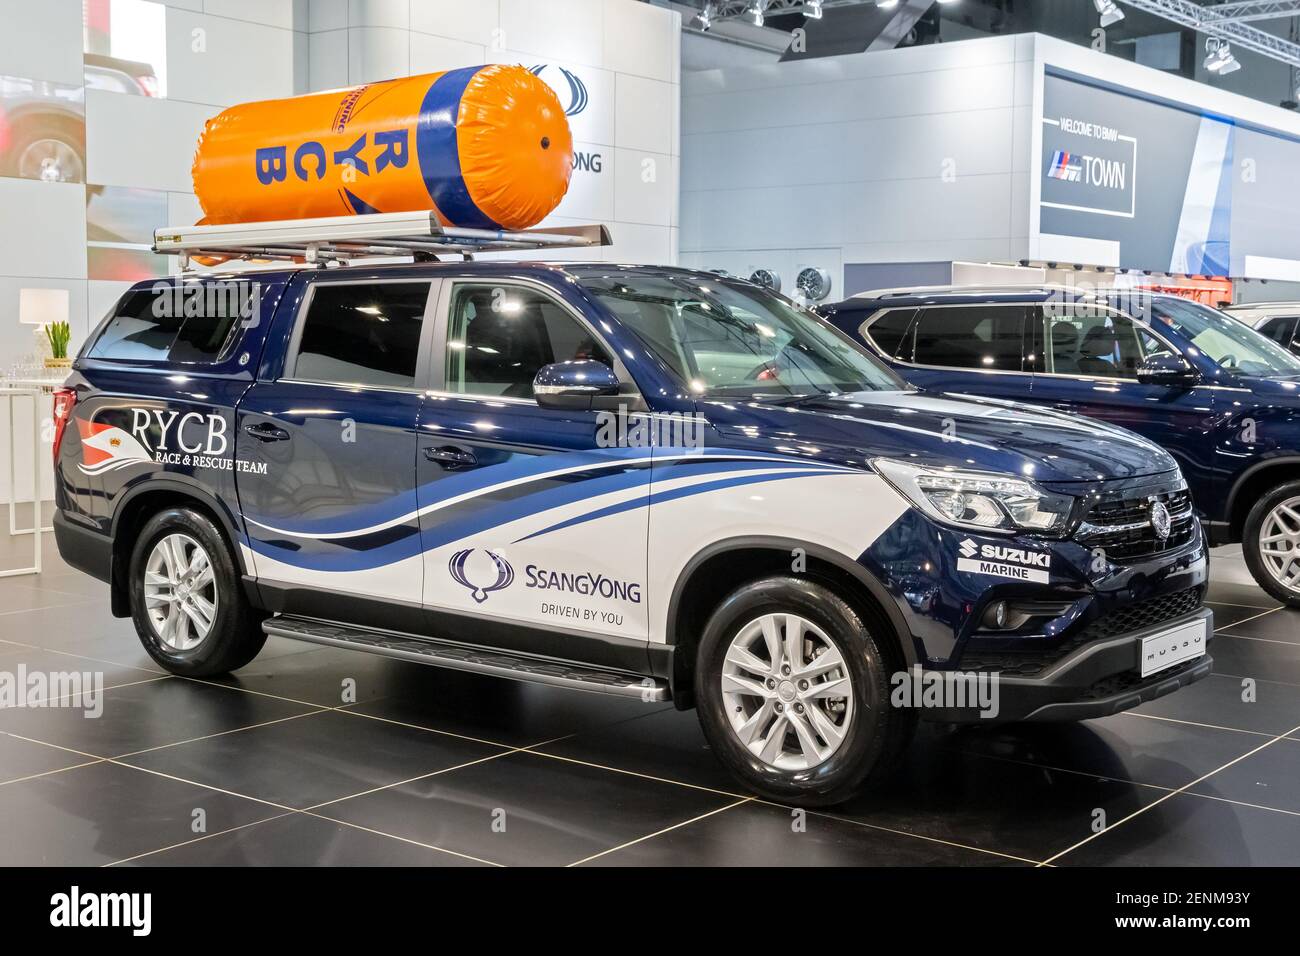 SsangYong Musso car at the Brussels Autosalon Motor Show. Belgium - January 18, 2019. Stock Photo